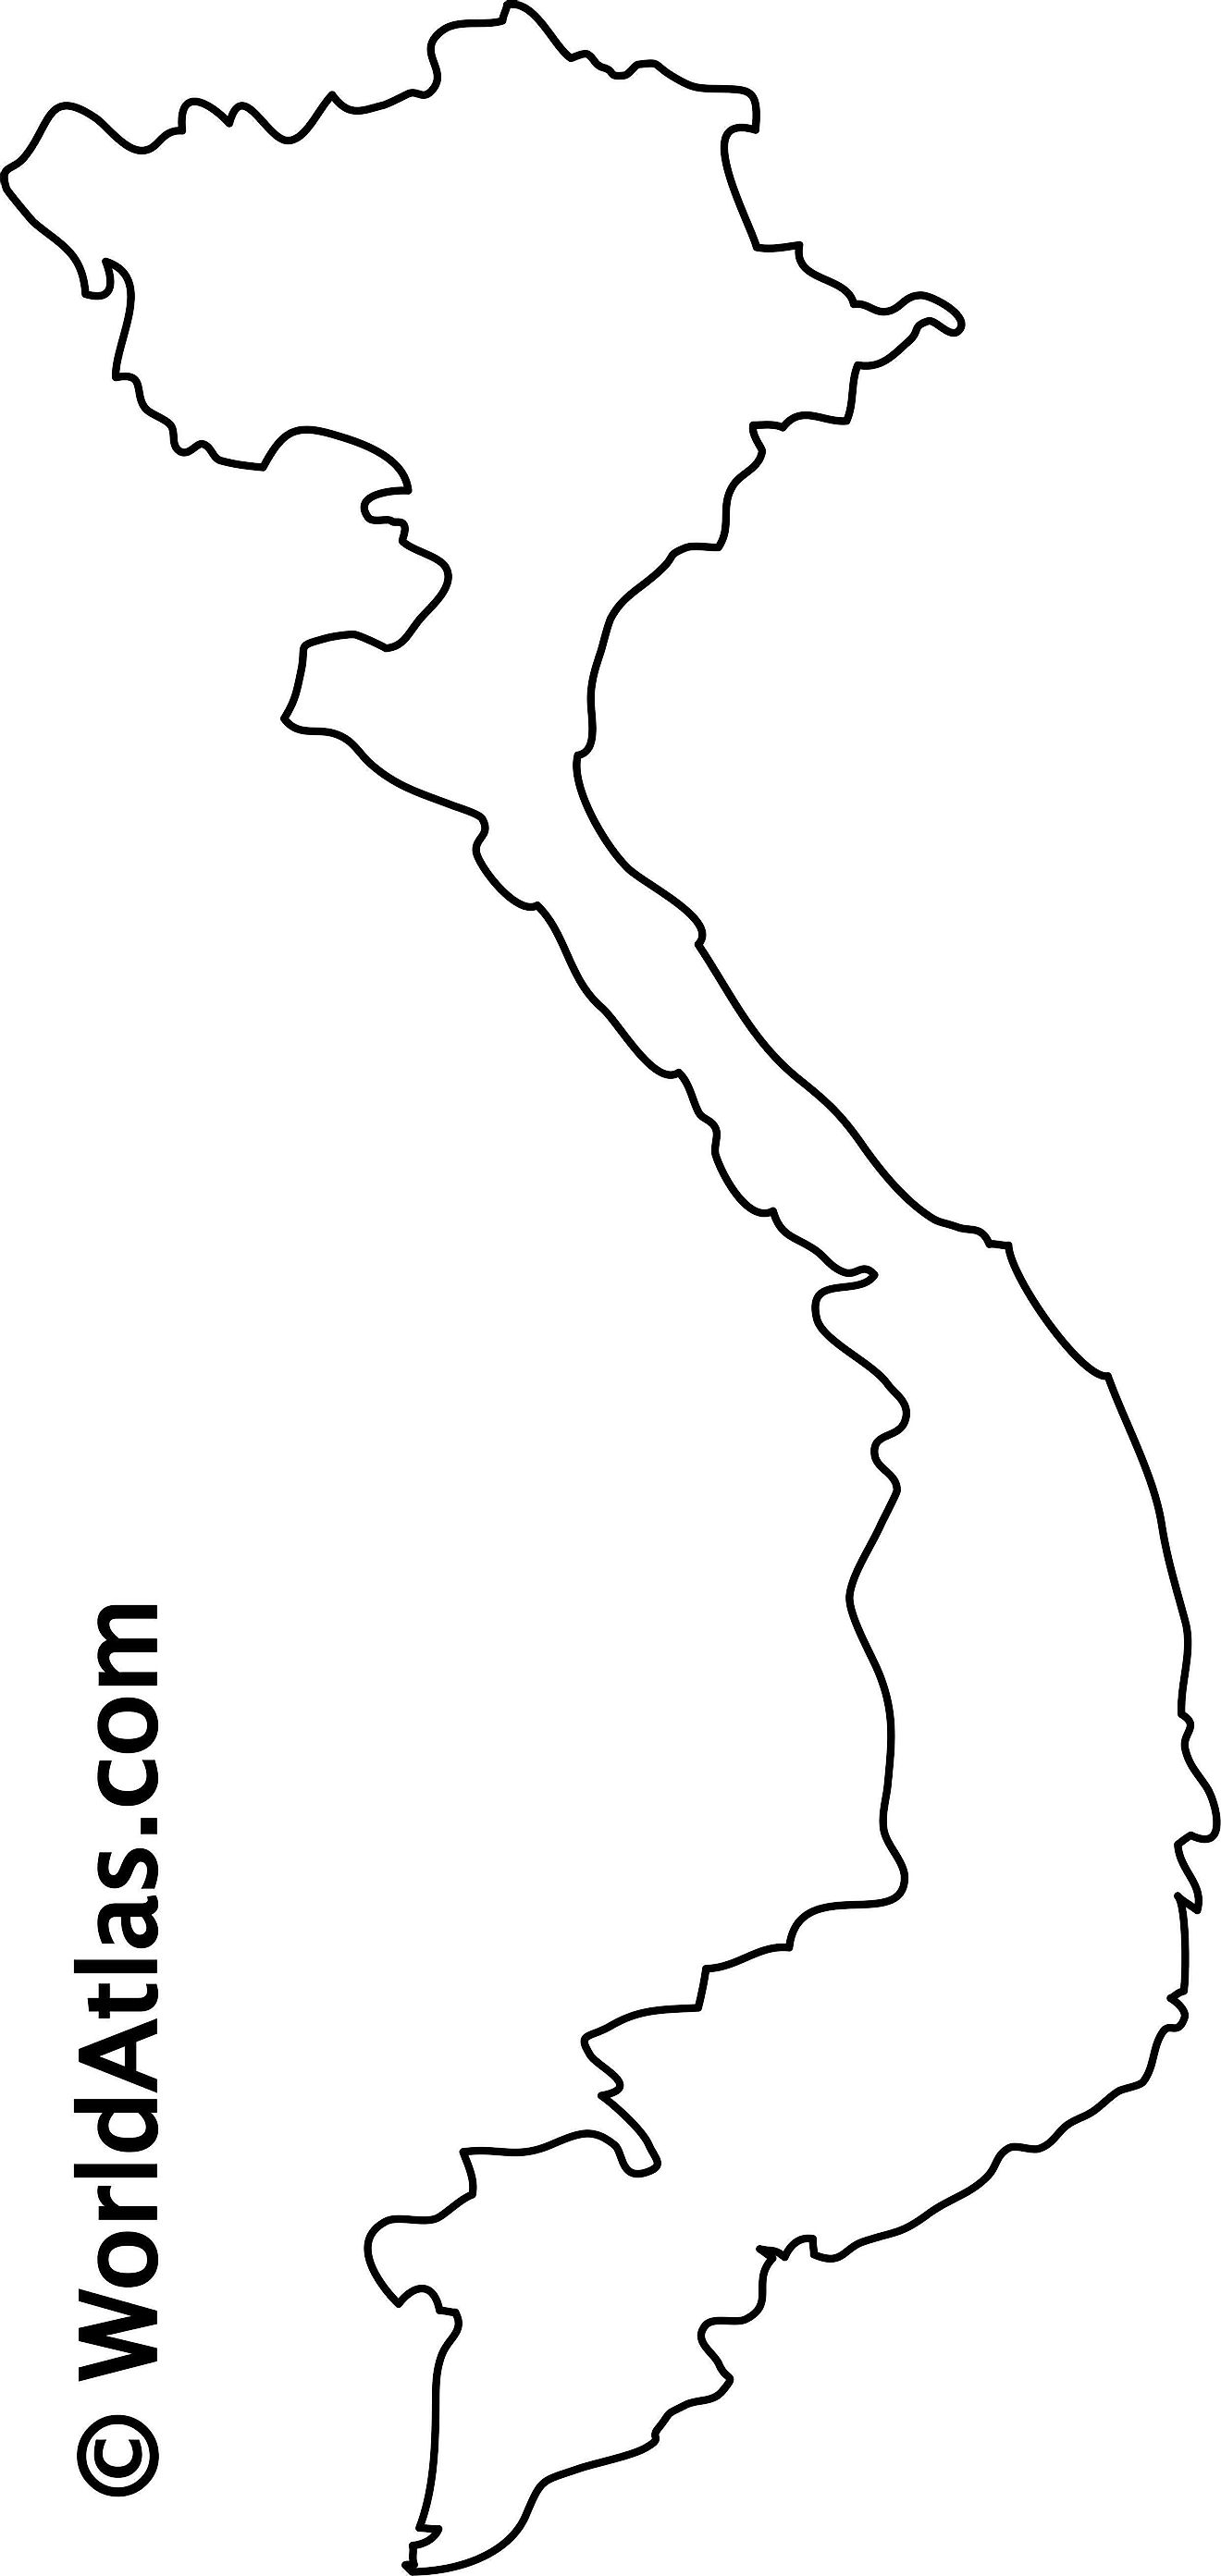 Blank Outline Map of Vietnam